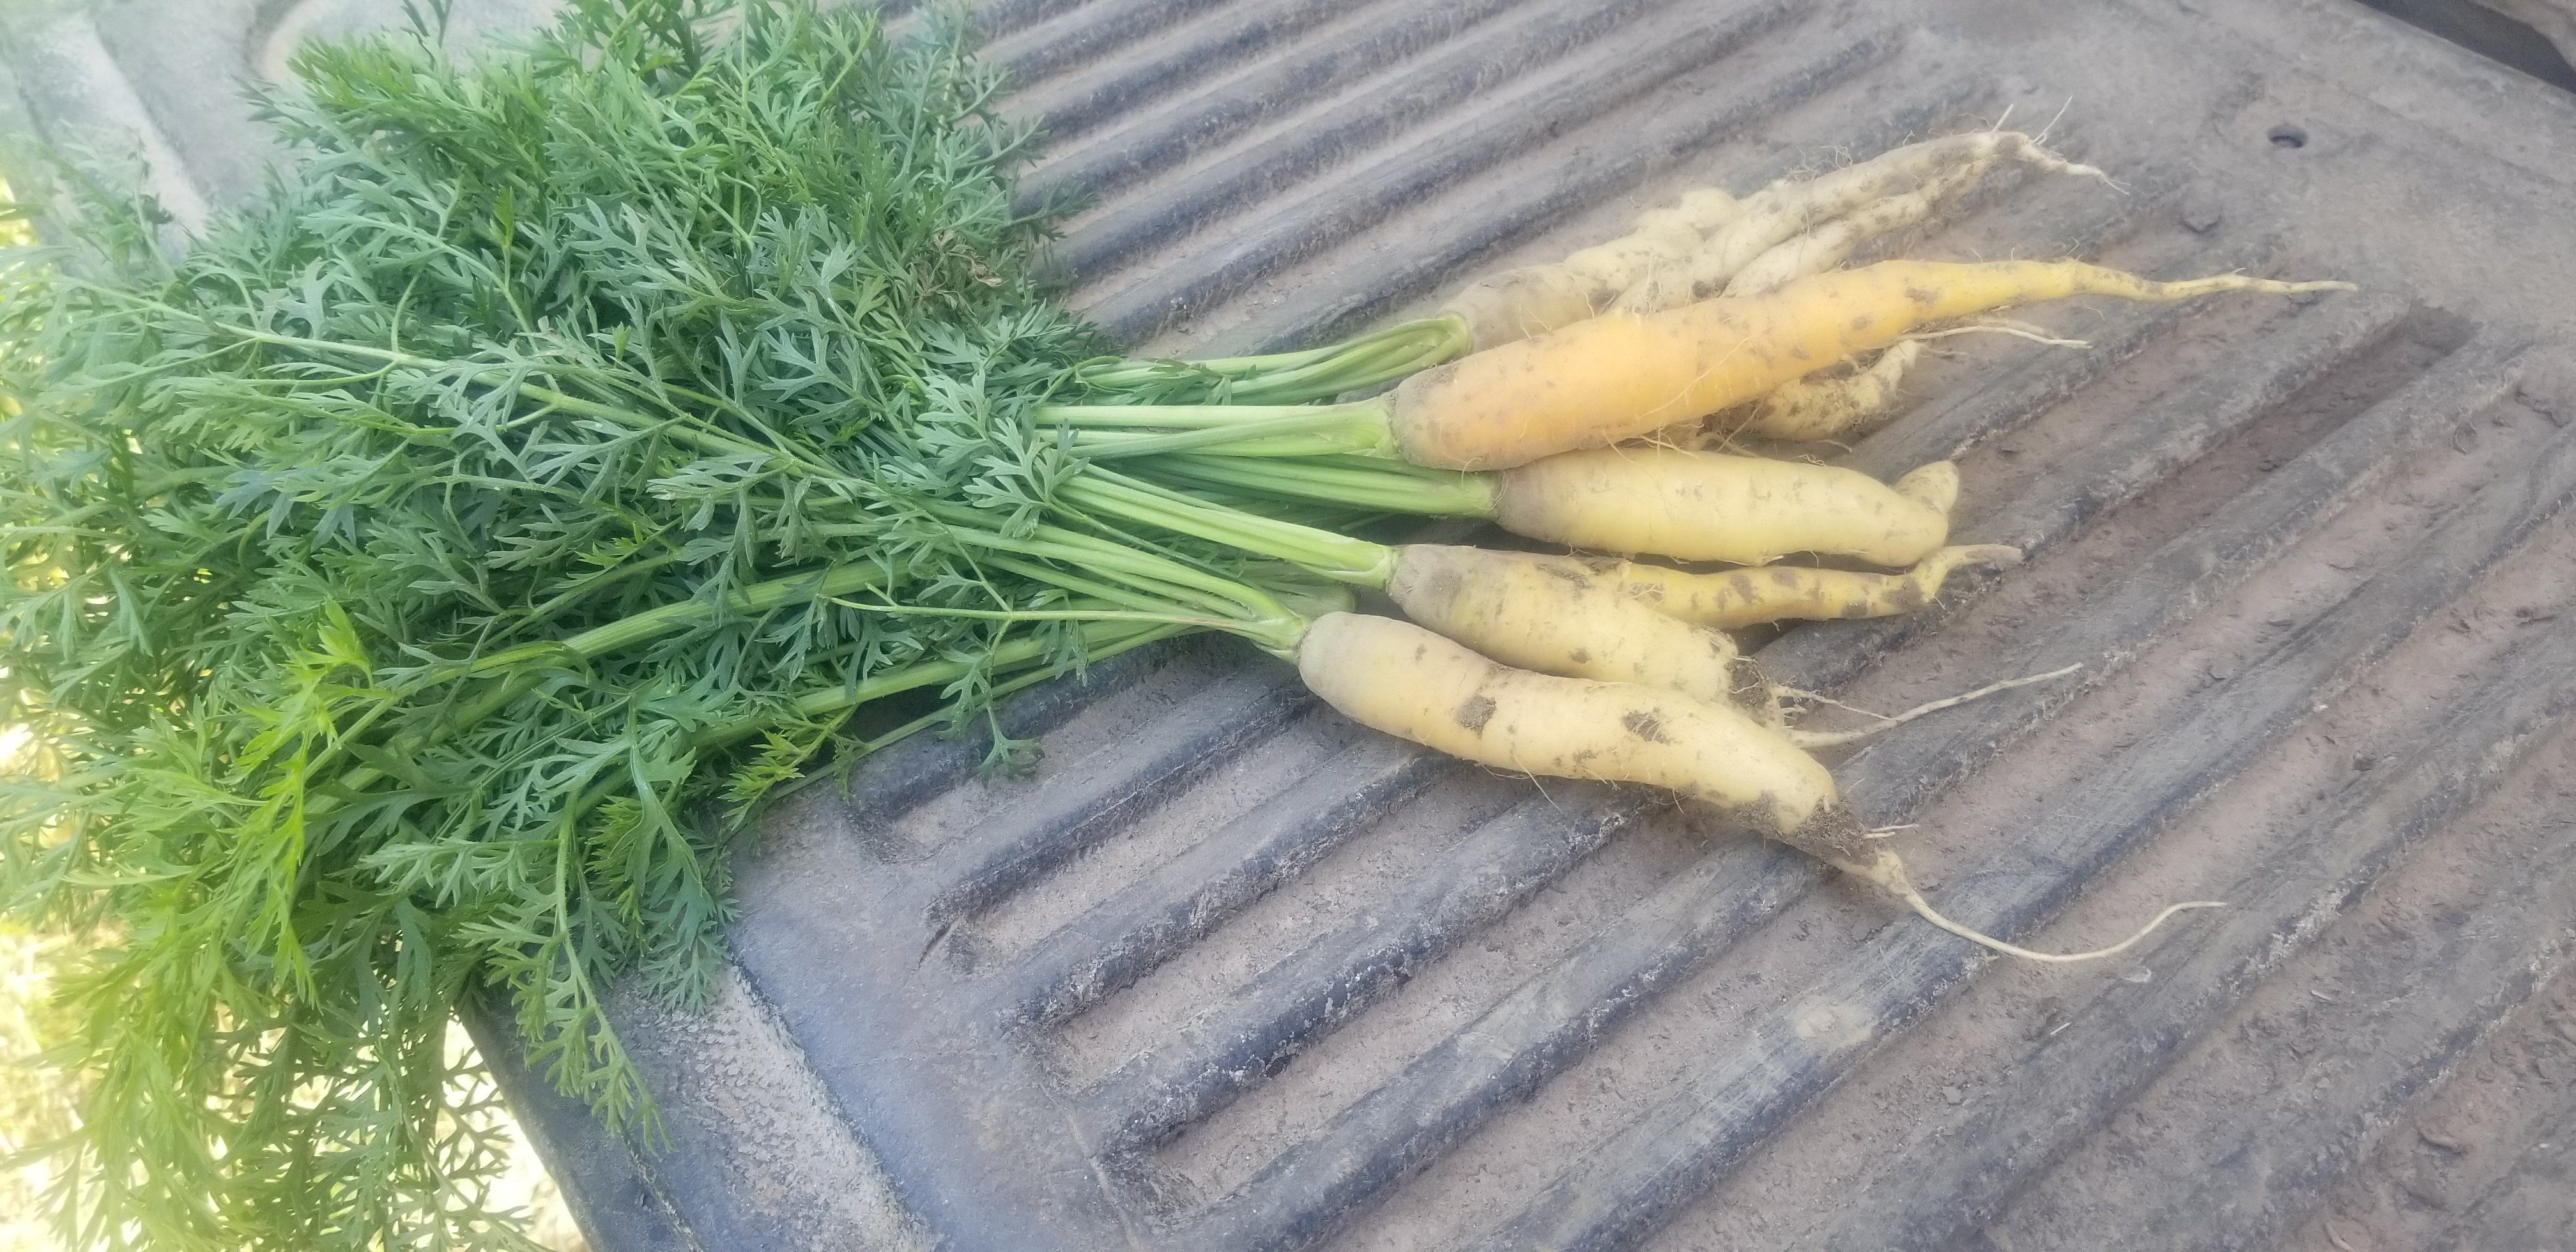 Farm Happenings for the week of August 8, 2020